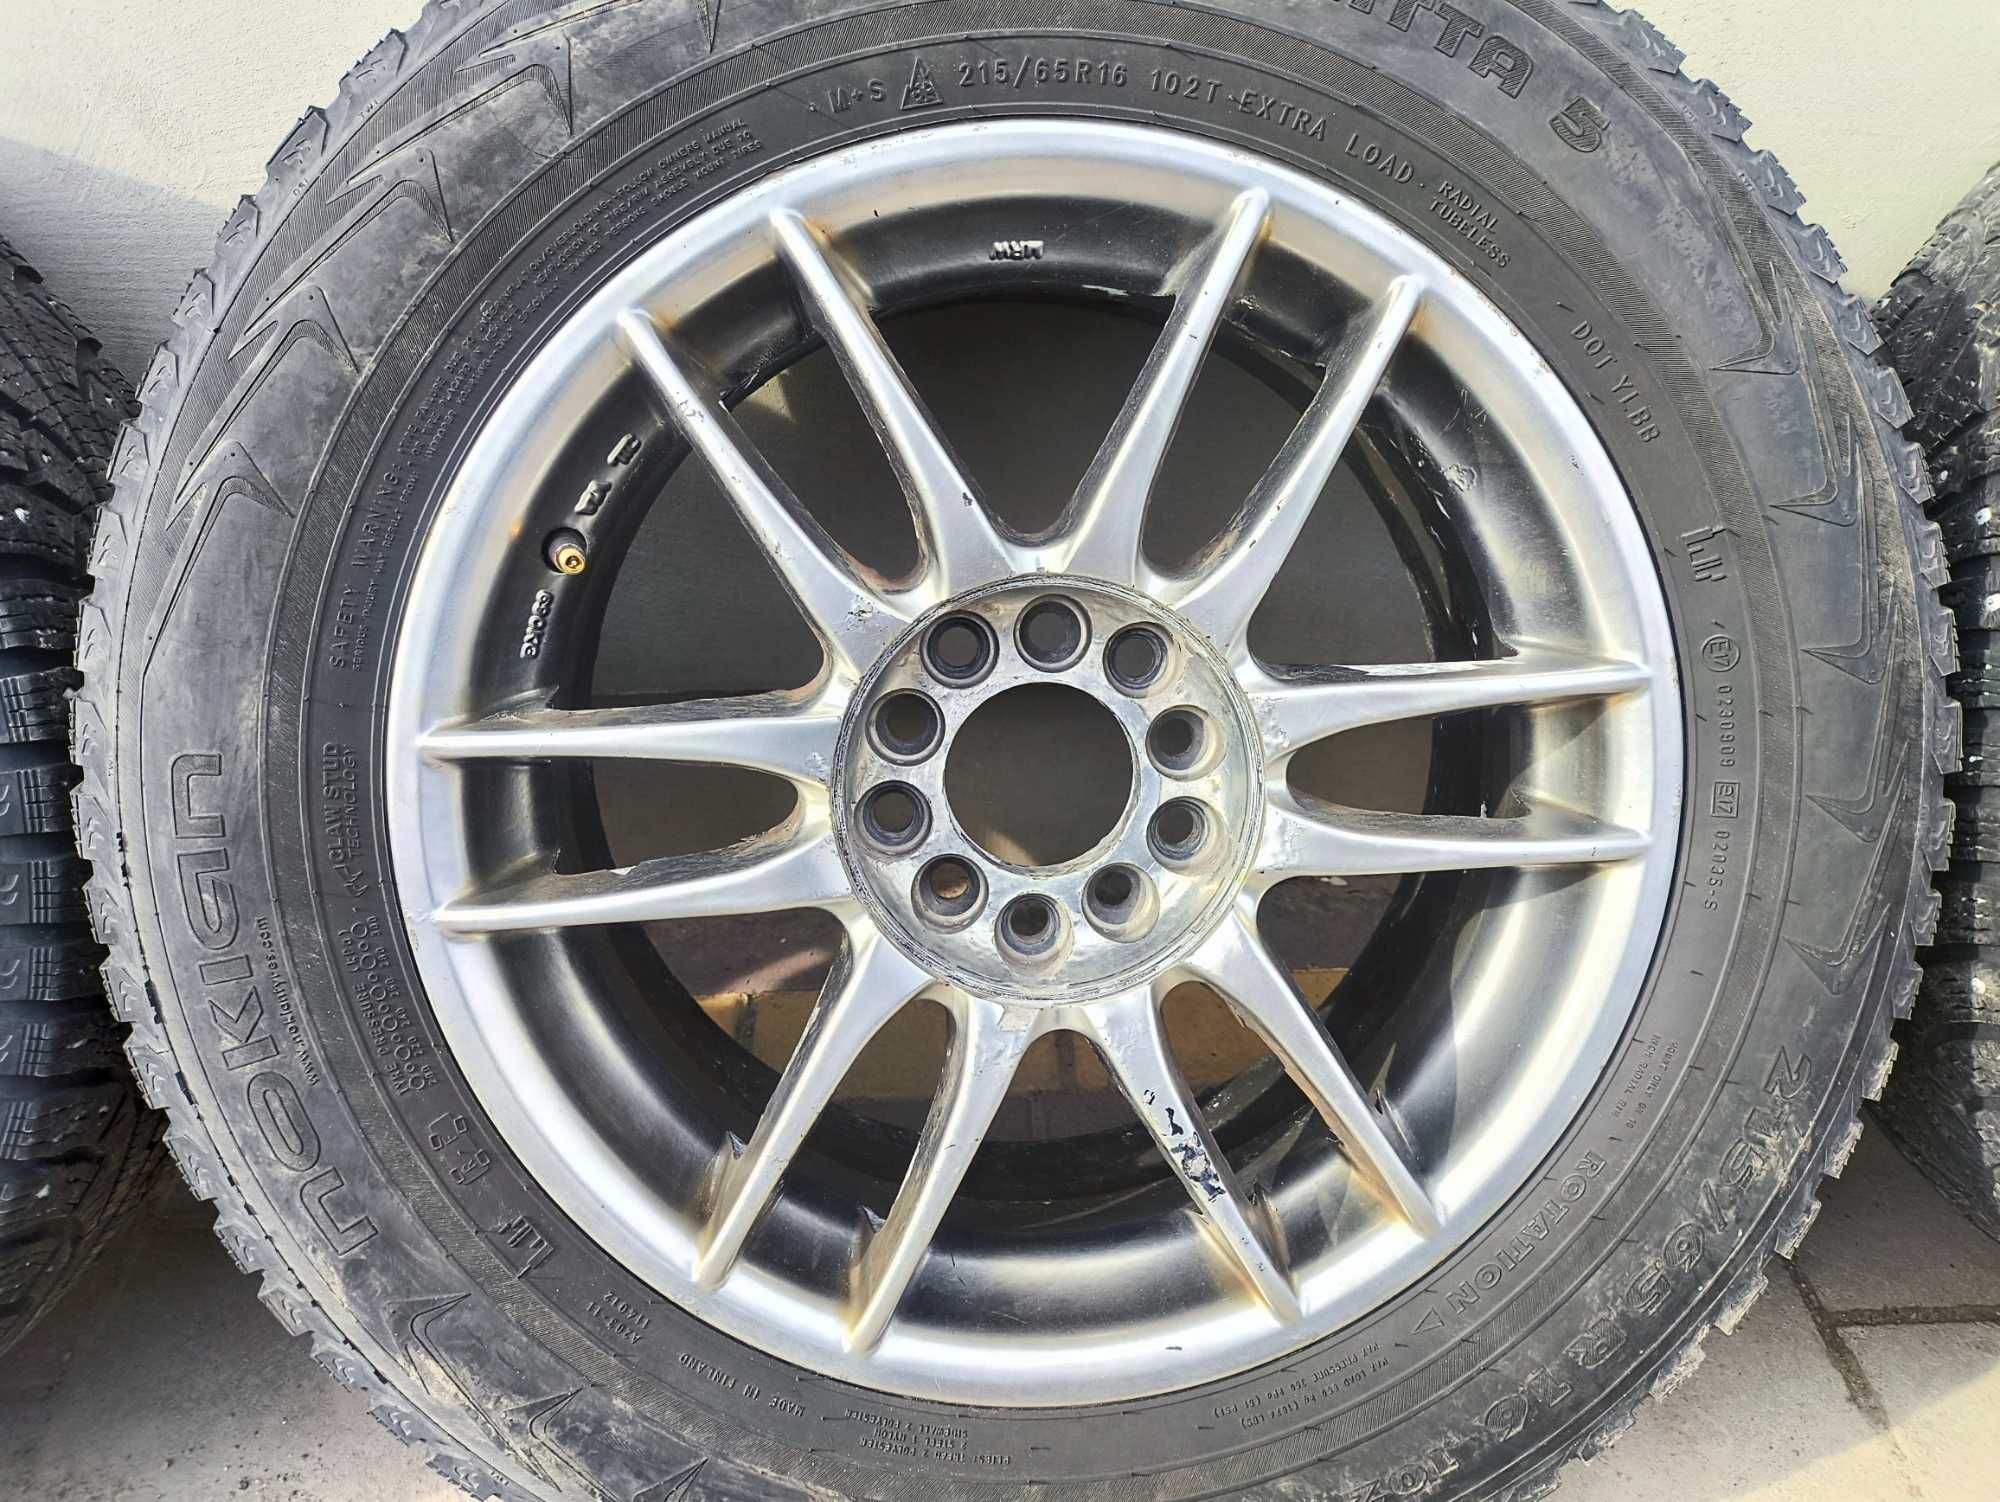 Диски R16 5x108 5x114.3 Renault Nissan Mazda Ford Volvo Peugeot.